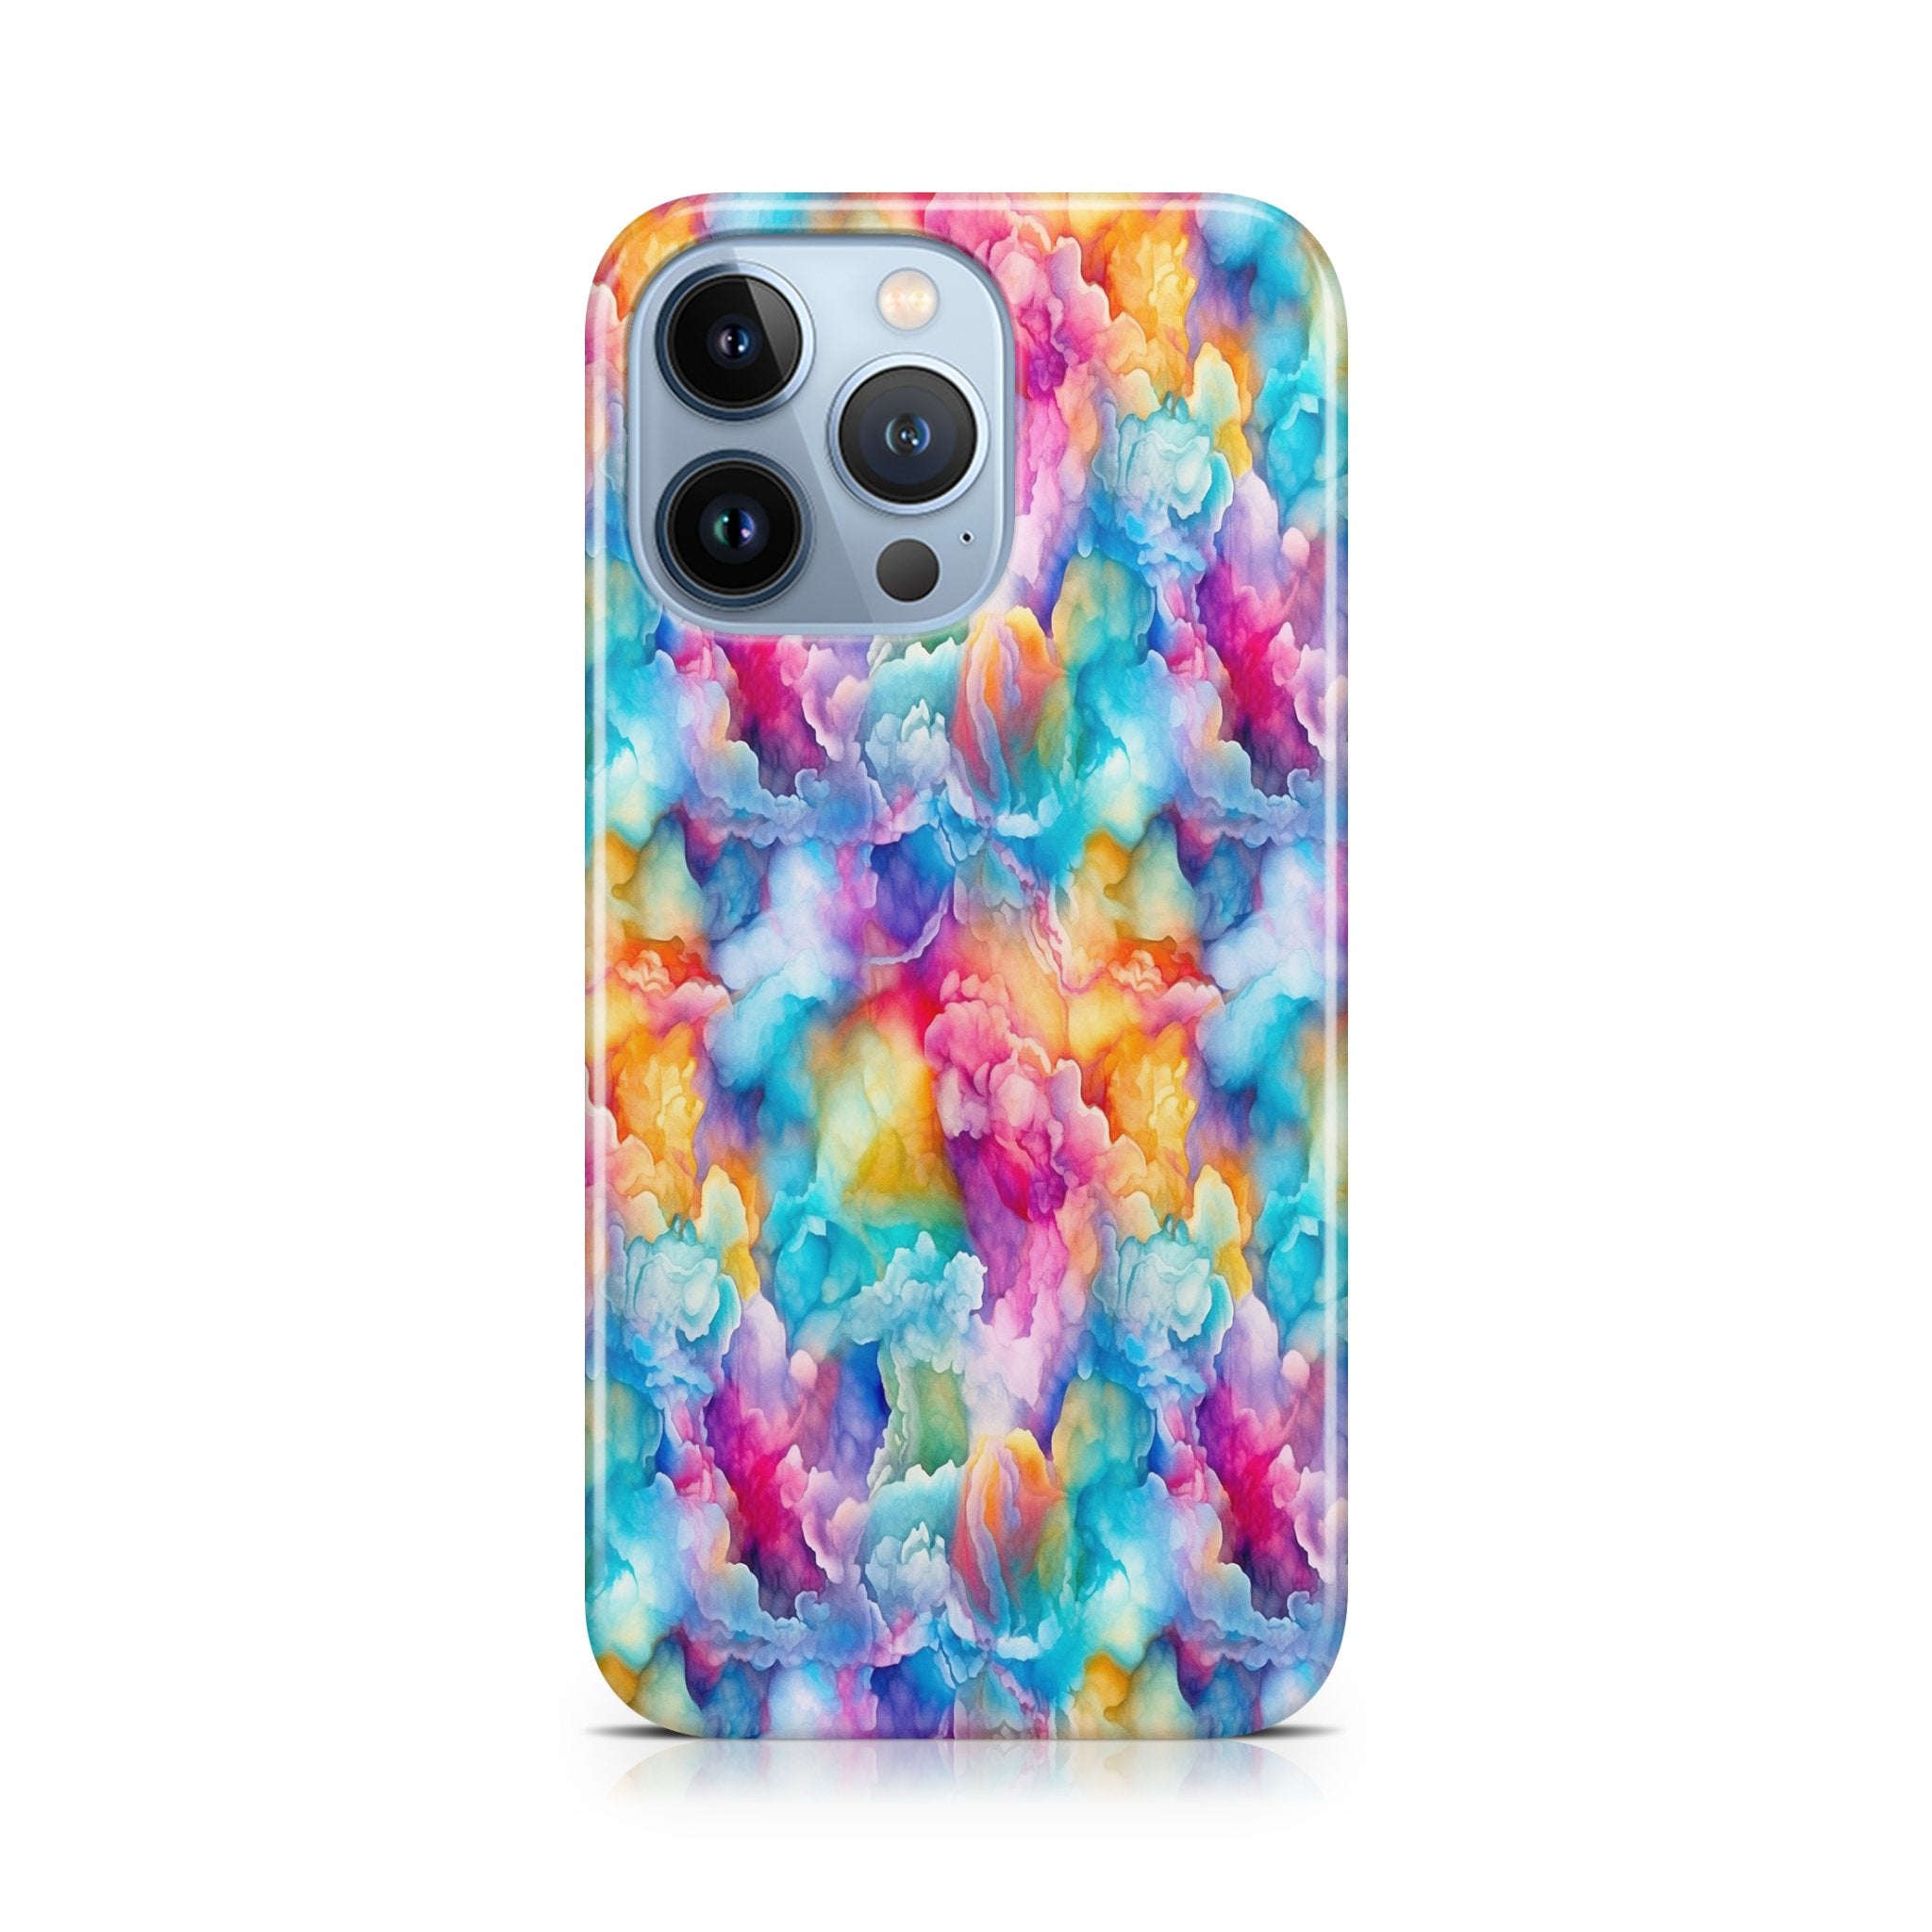 Cloudy Rainbow - iPhone phone case designs by CaseSwagger